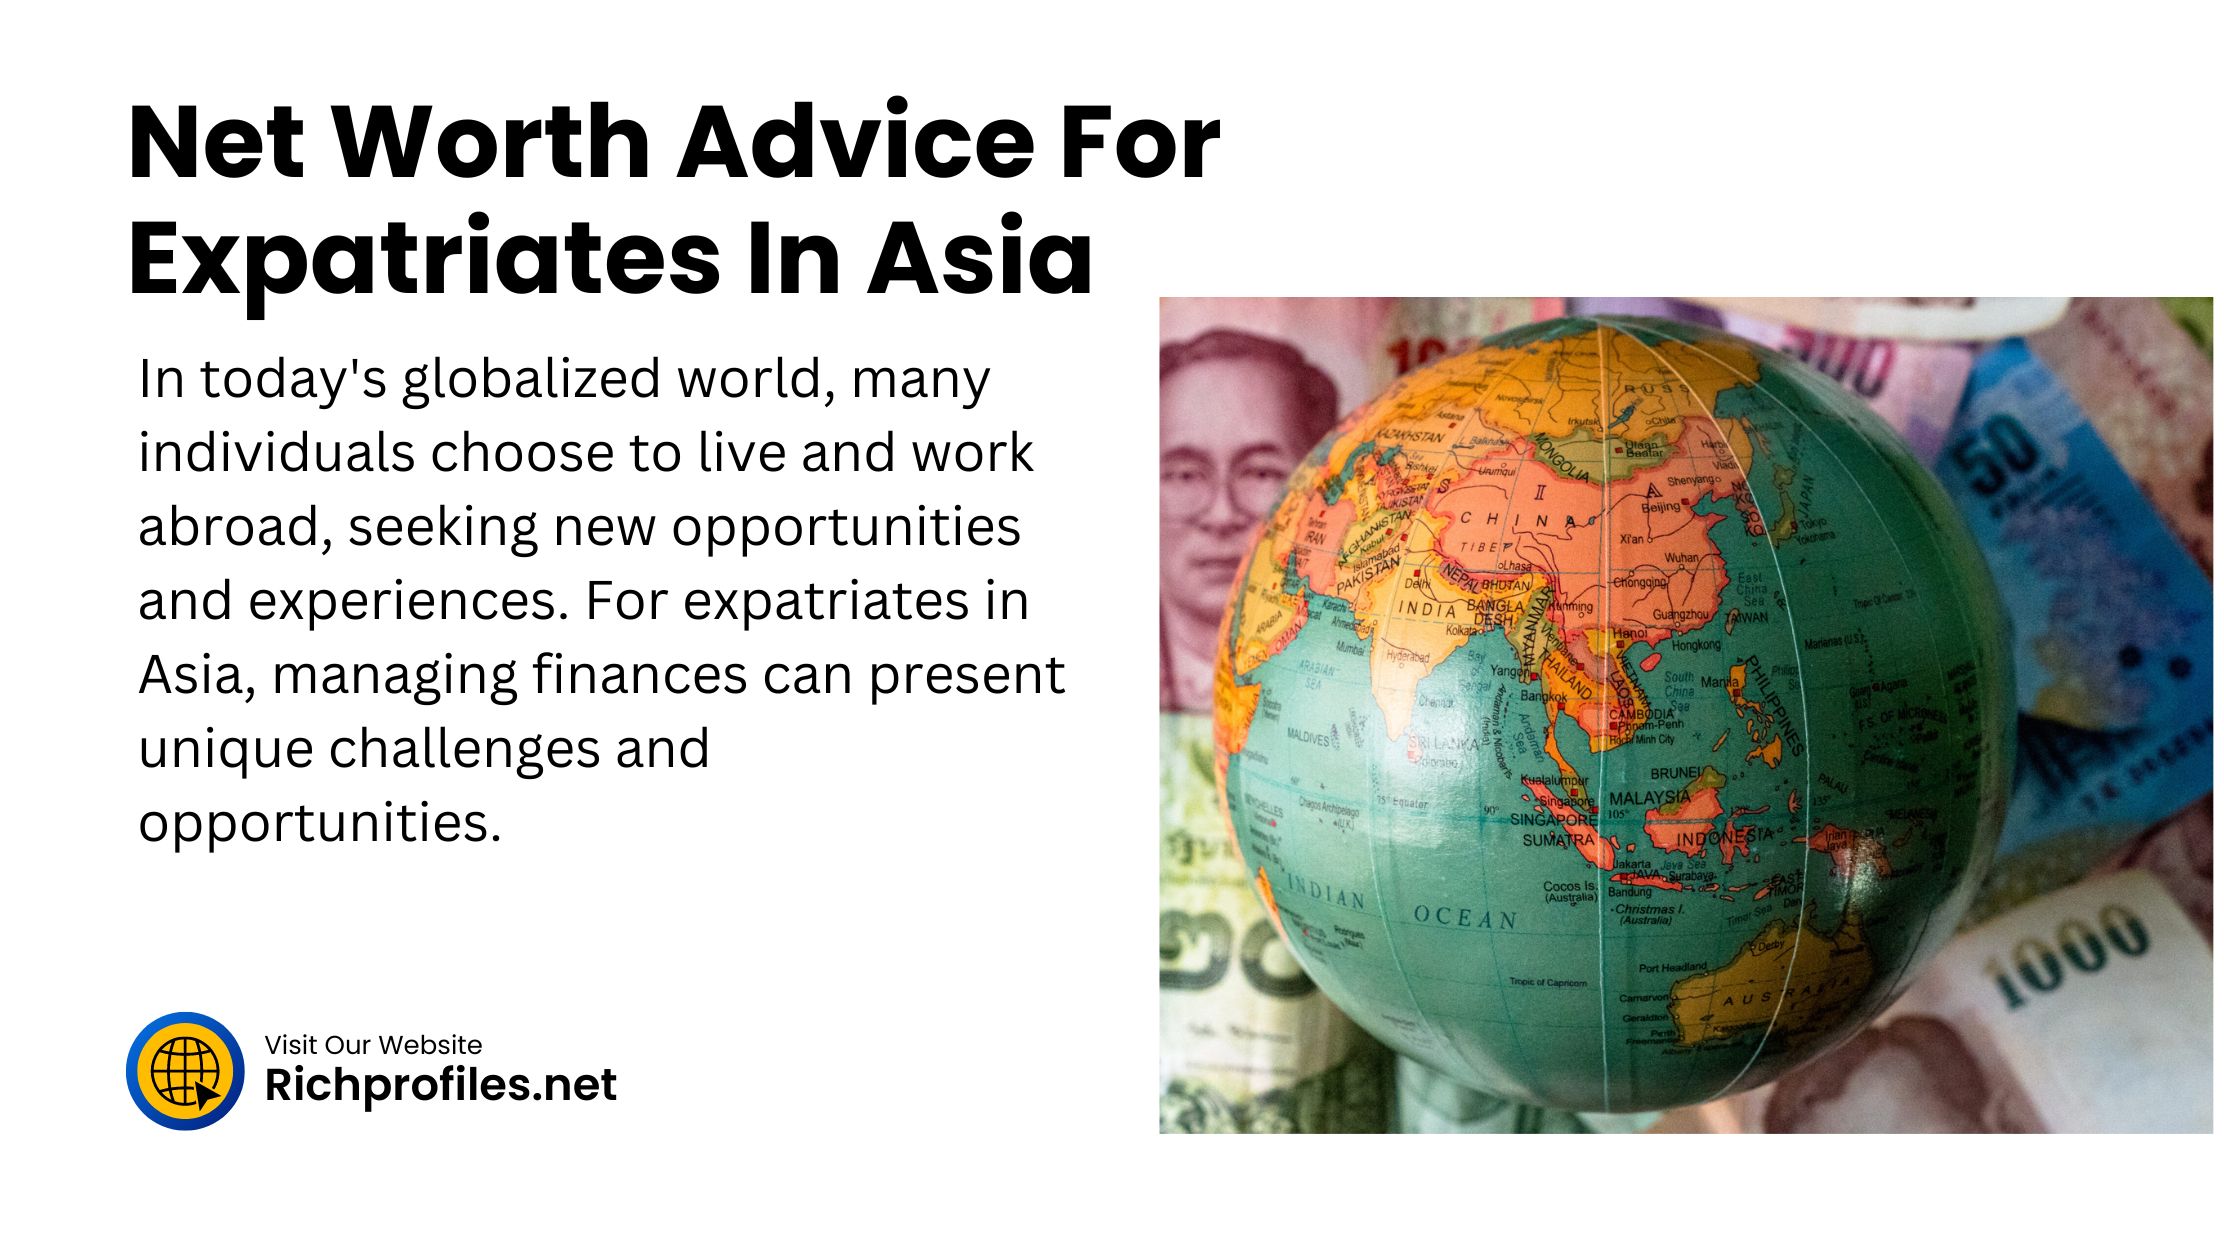 Net Worth Advice For Expatriates In Asia